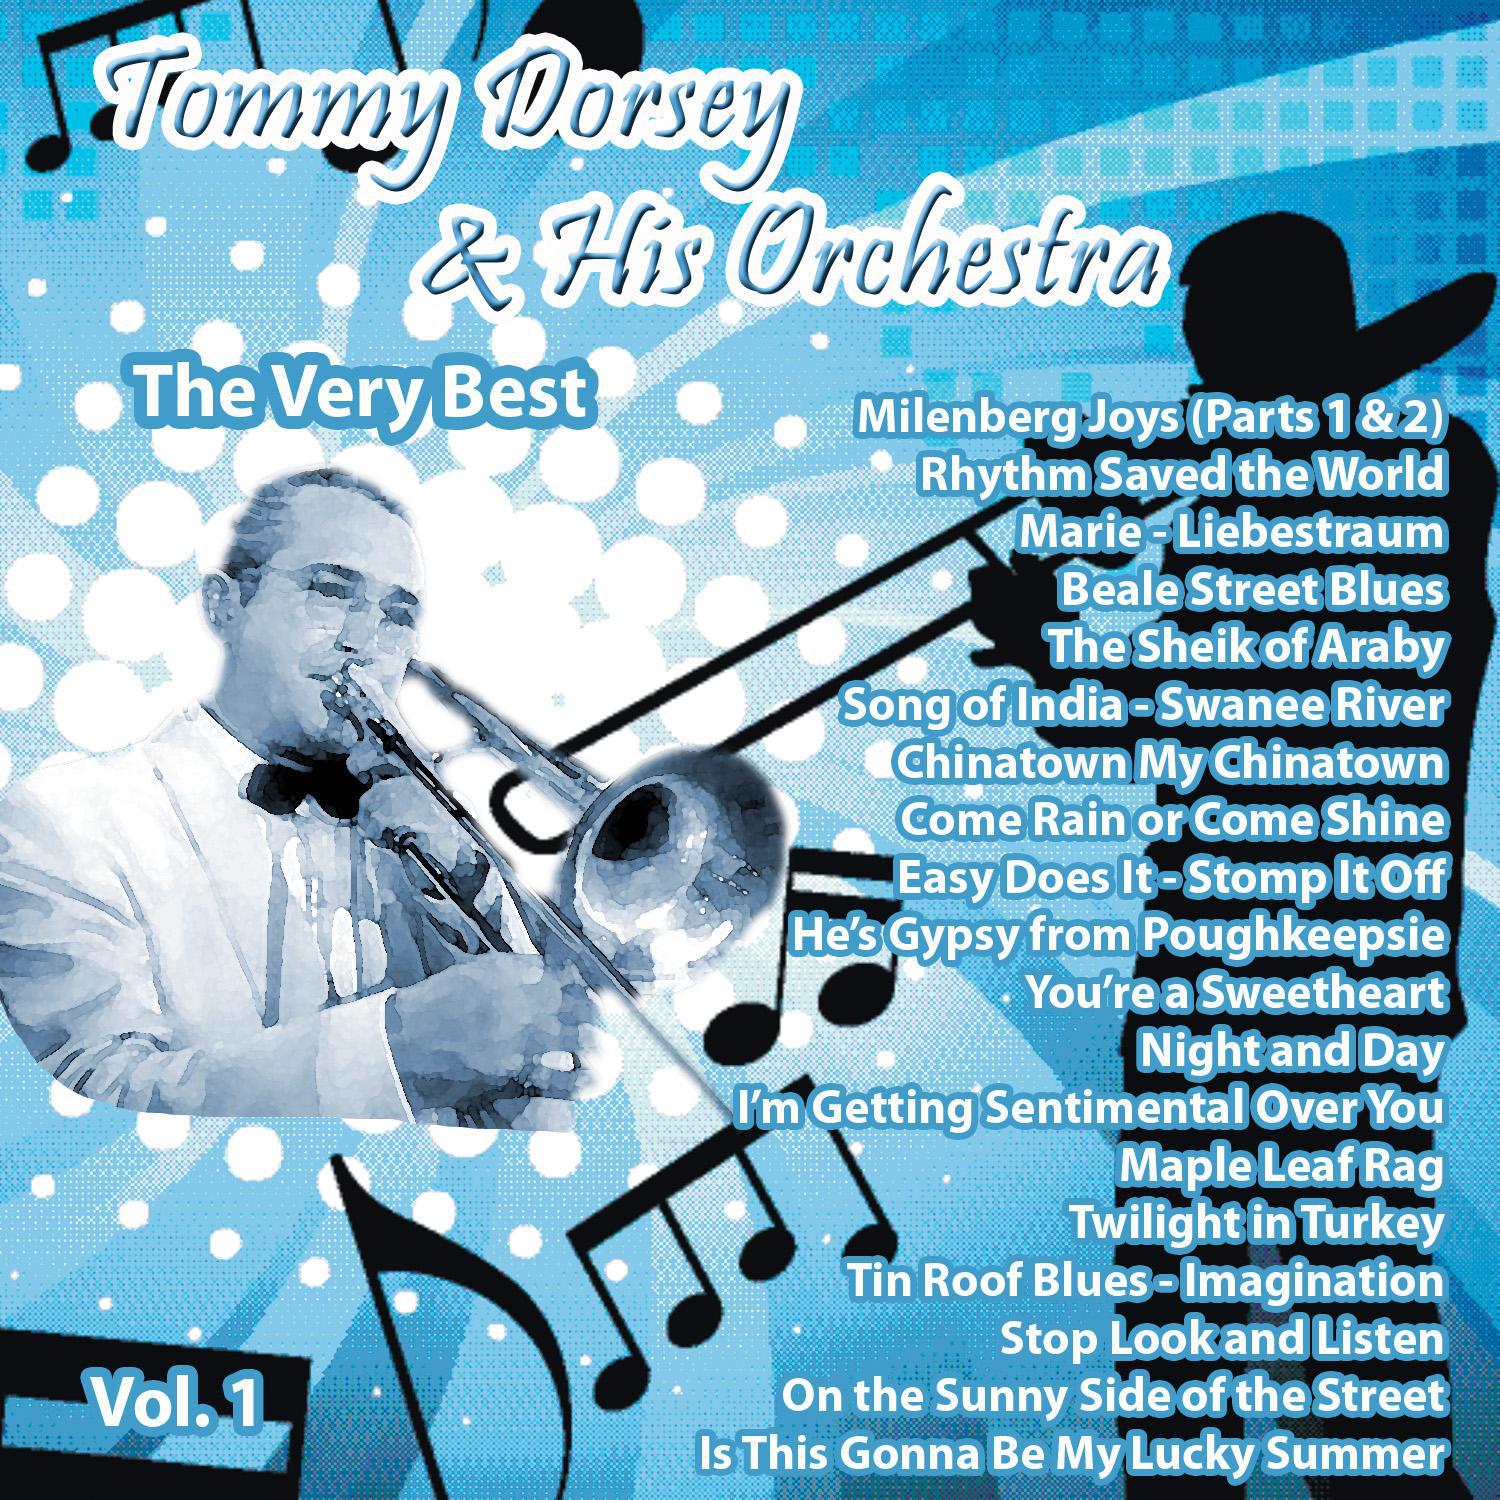 The Very Best: Tommy Dorsey & His Orchestra Vol. 1